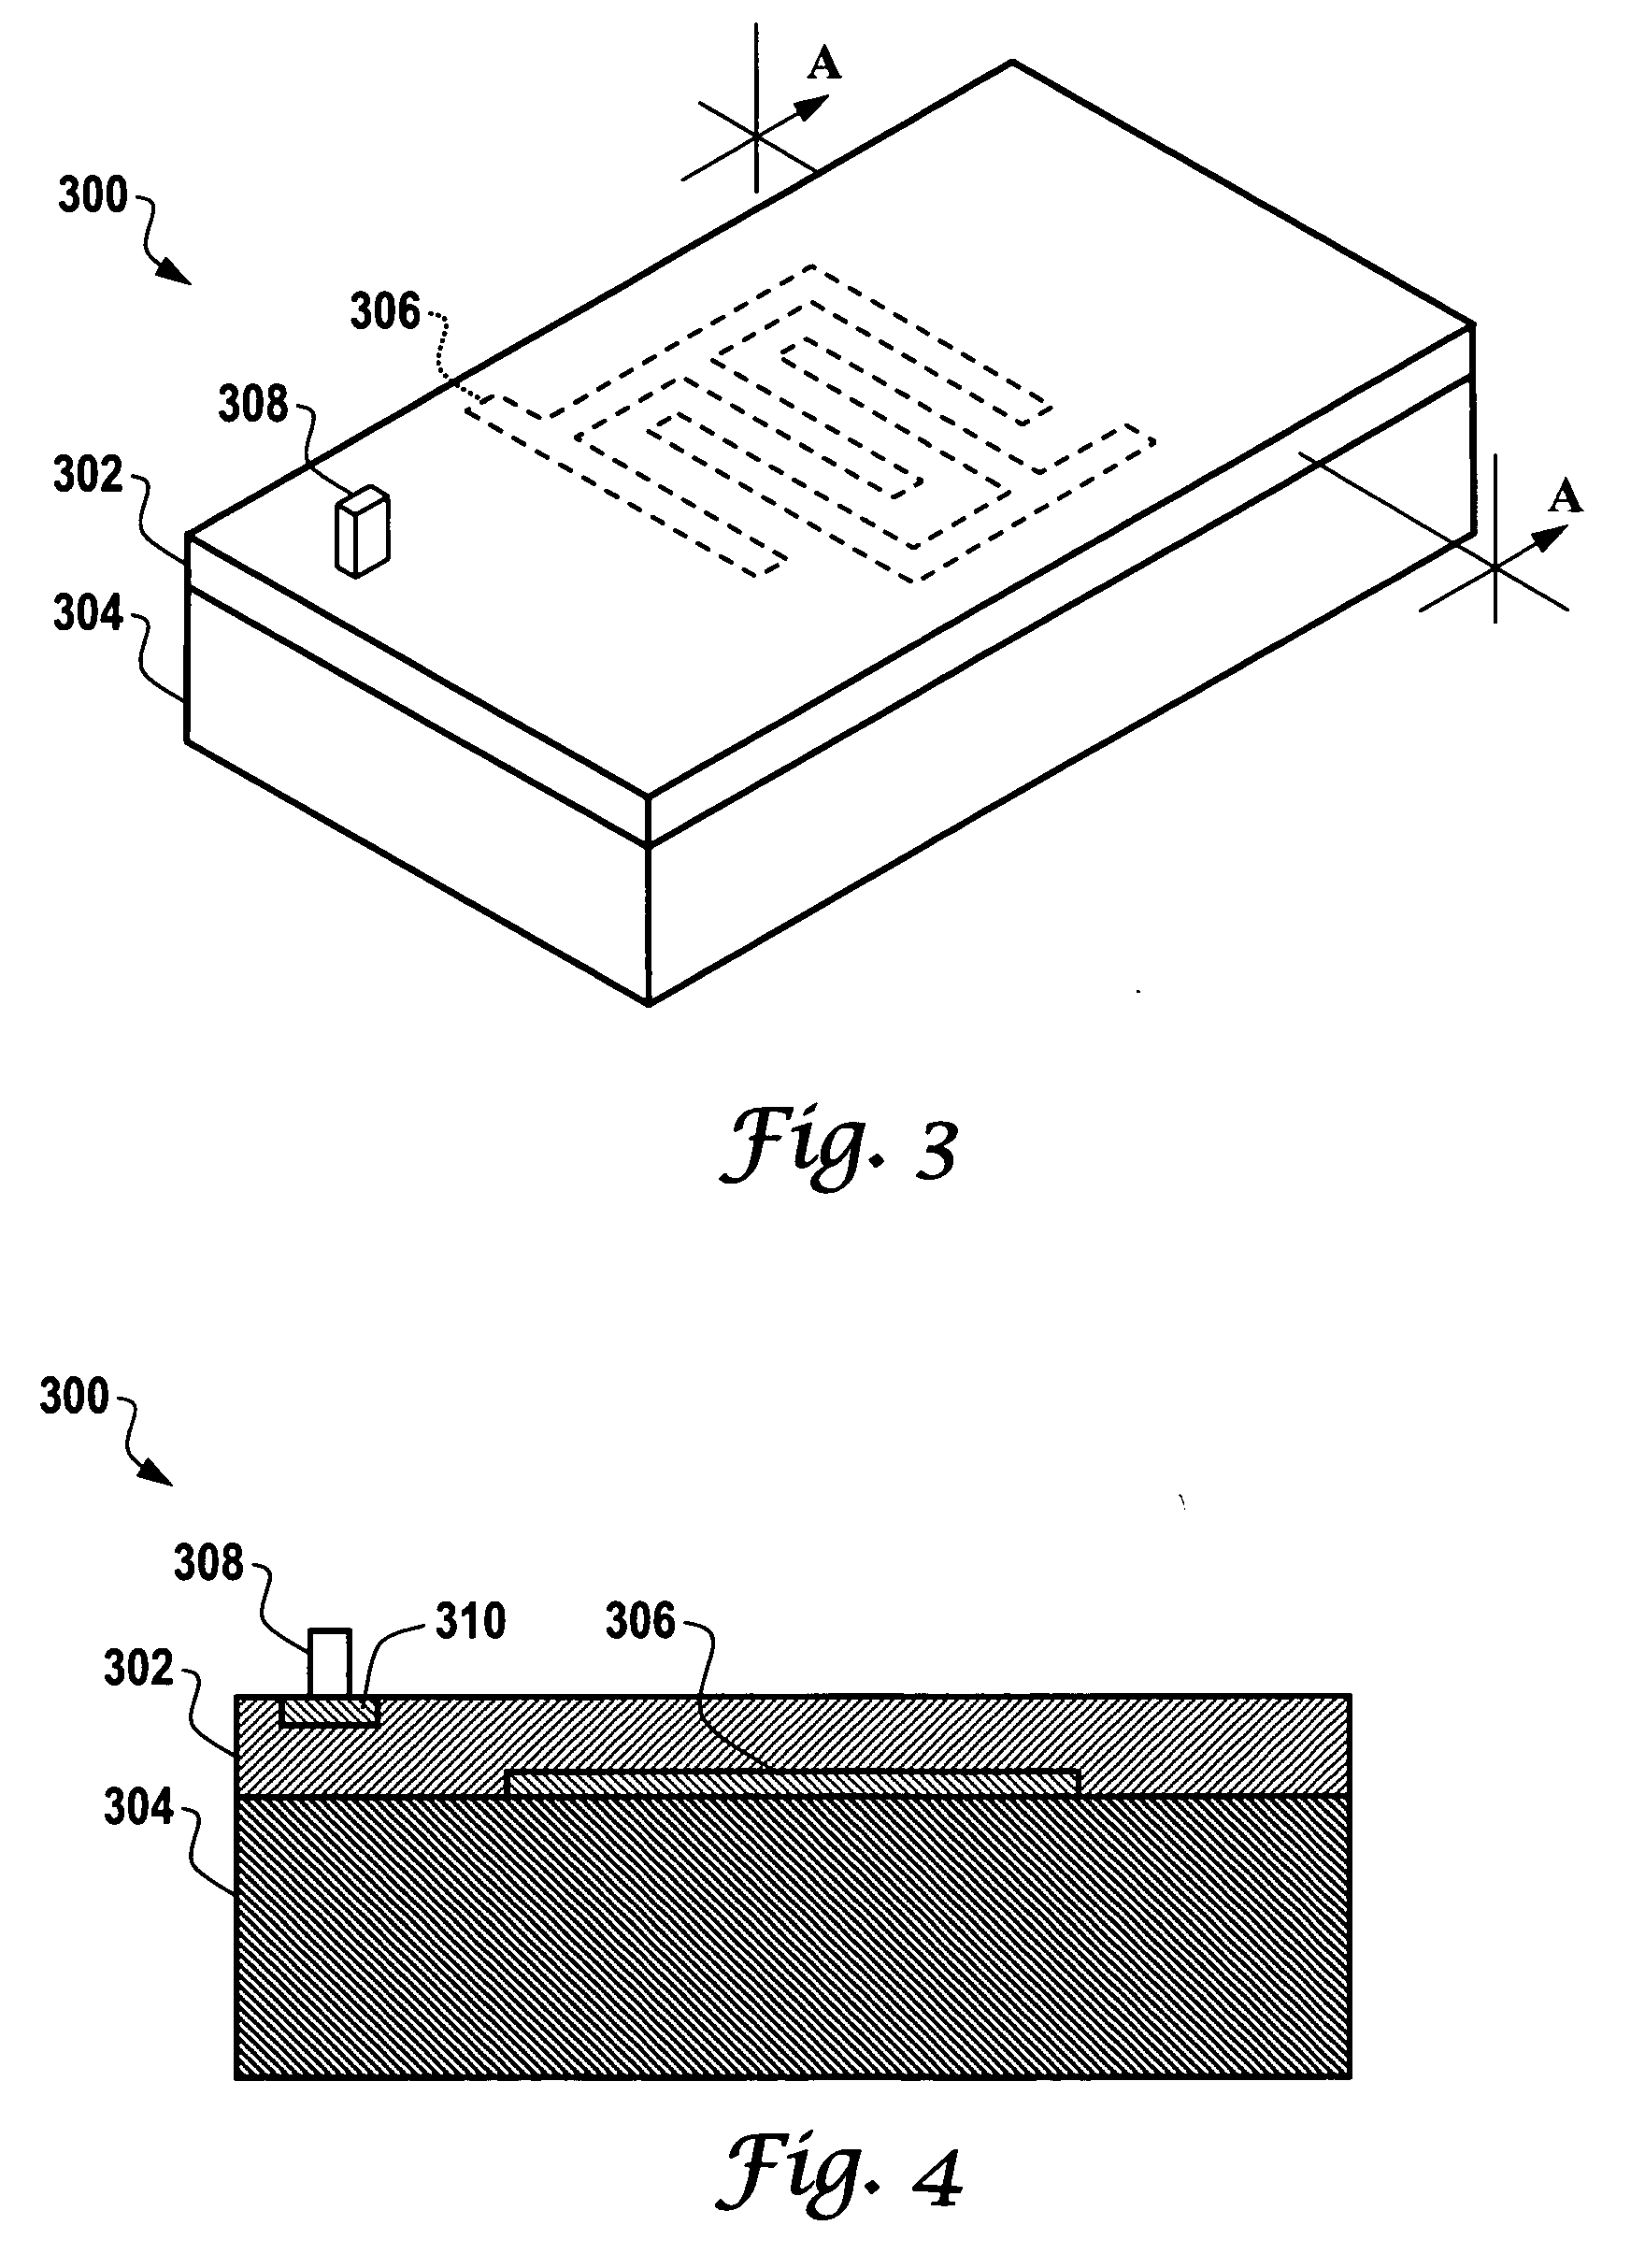 Acoustic wave sensor with reduced condensation and recovery time